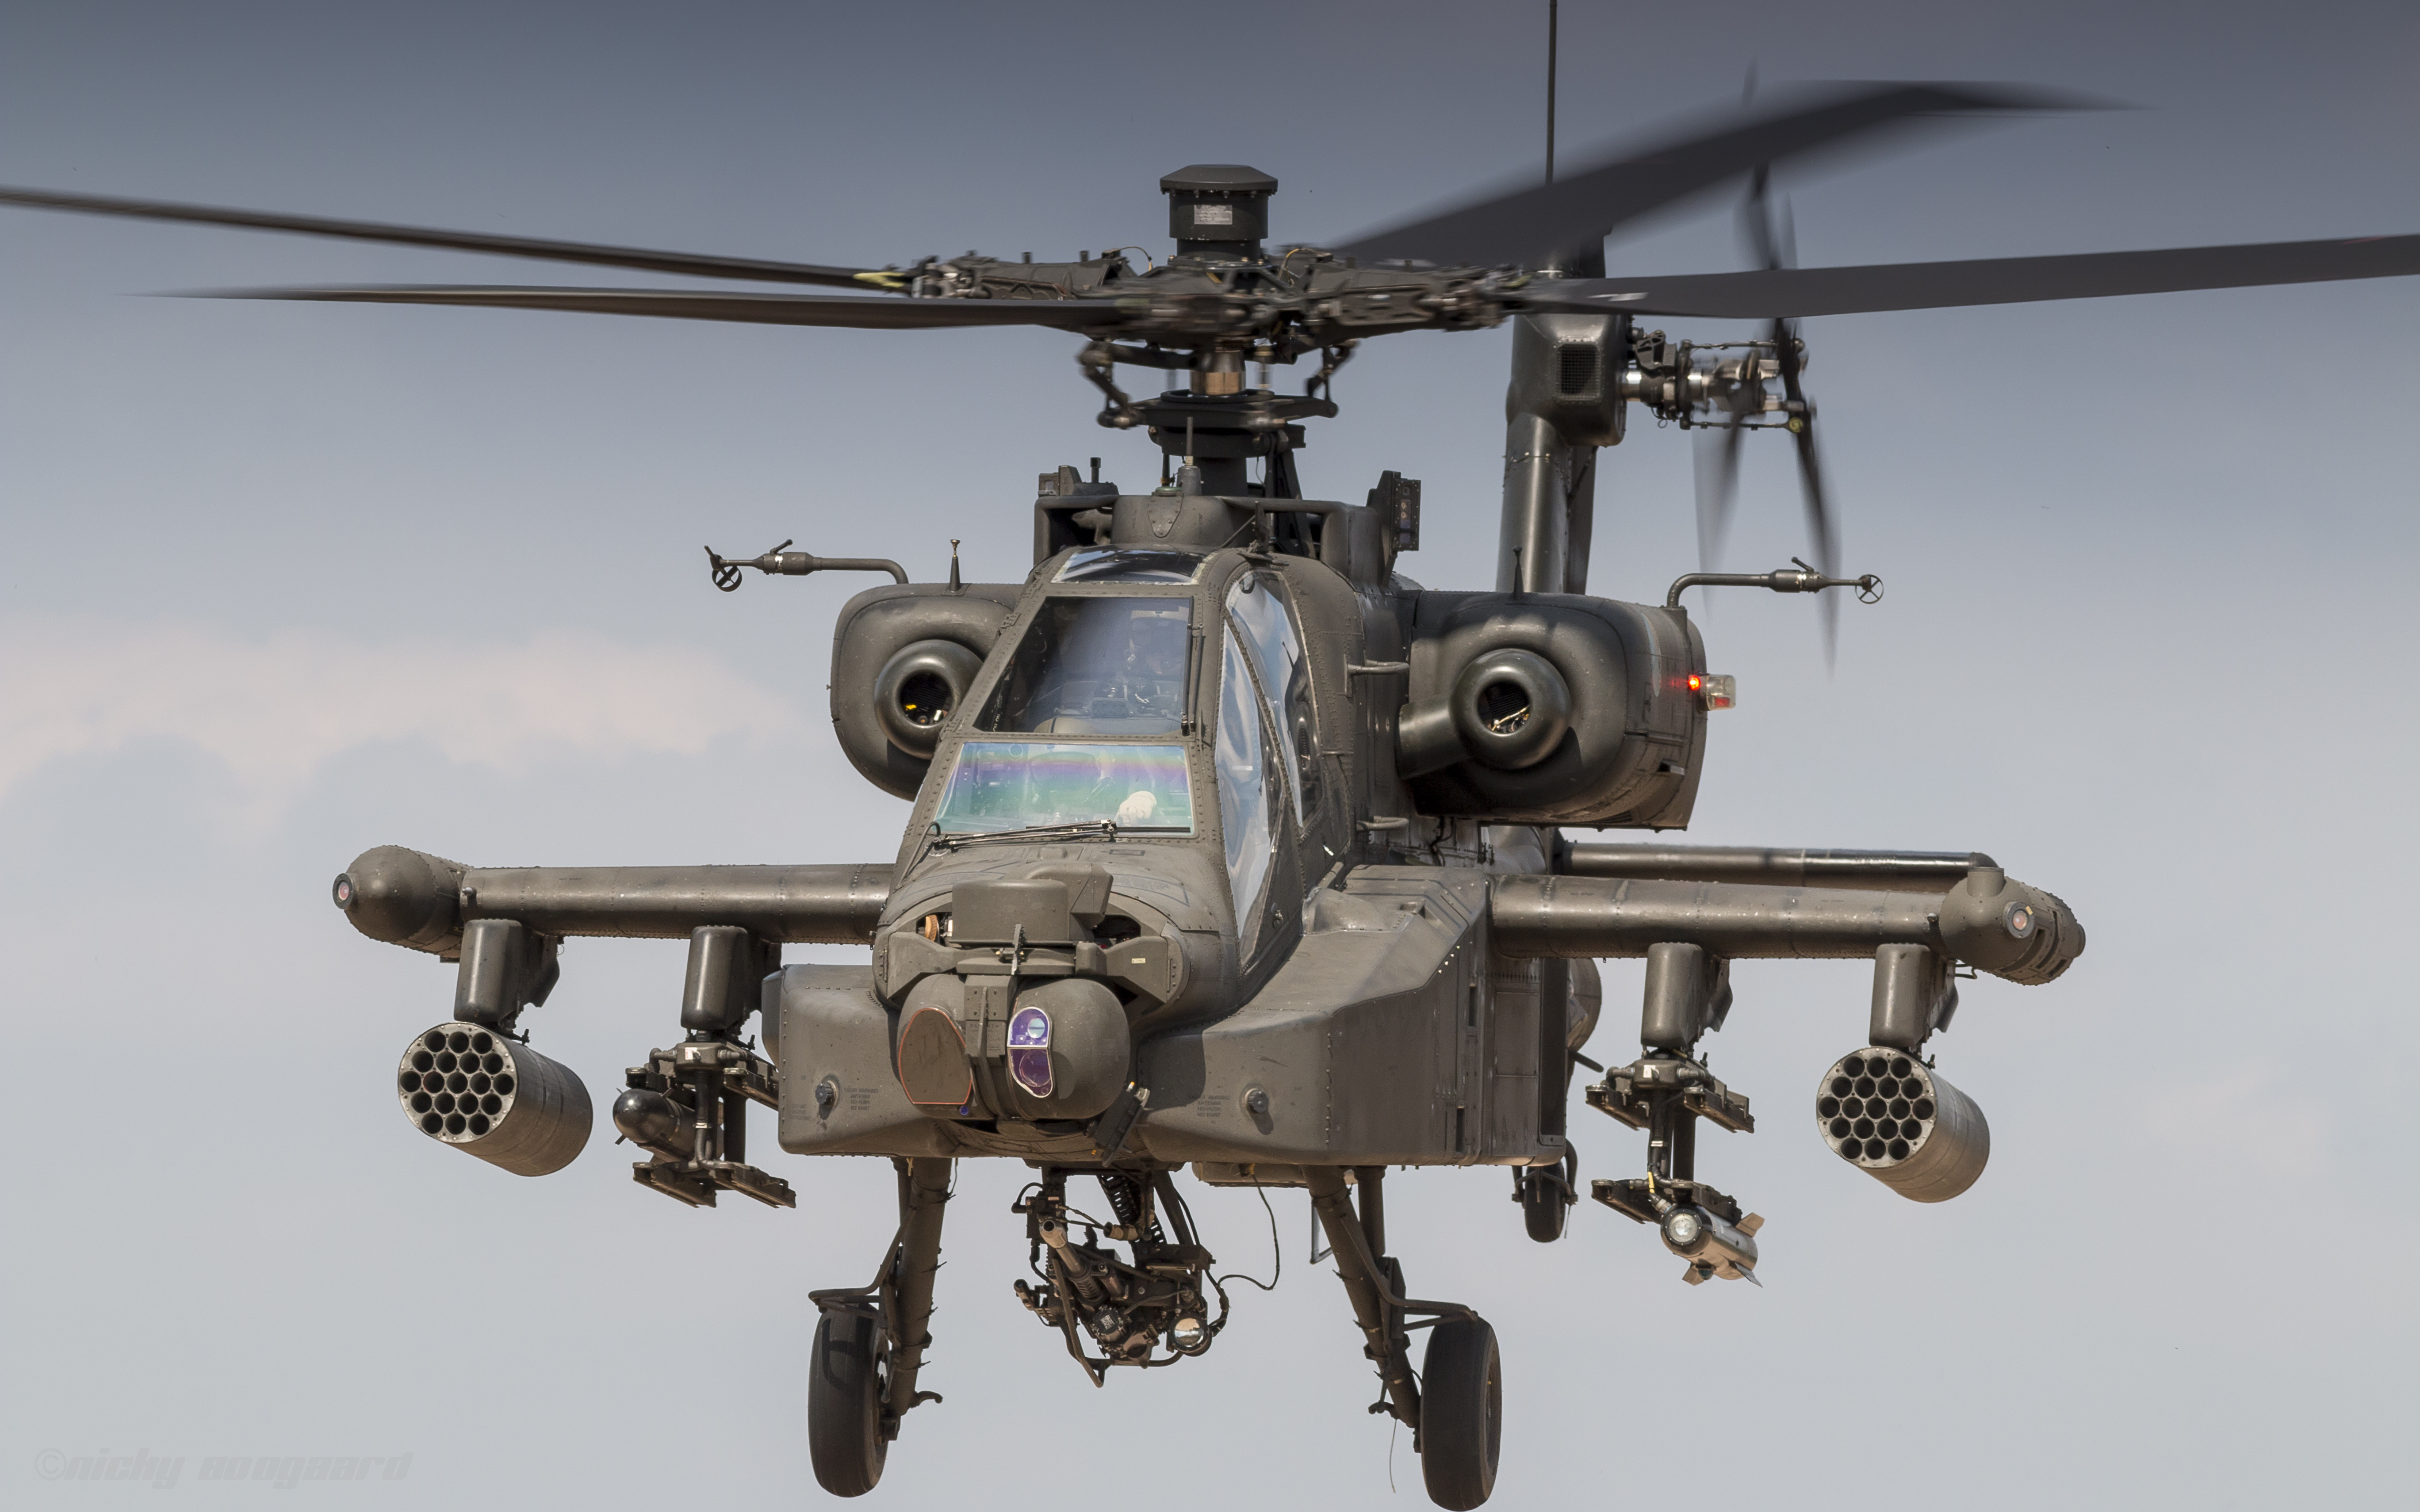 RNLAF_AH-64_Apache_at_the_Oirschotse_Heide_Low_Flying_Area_(36570605232)